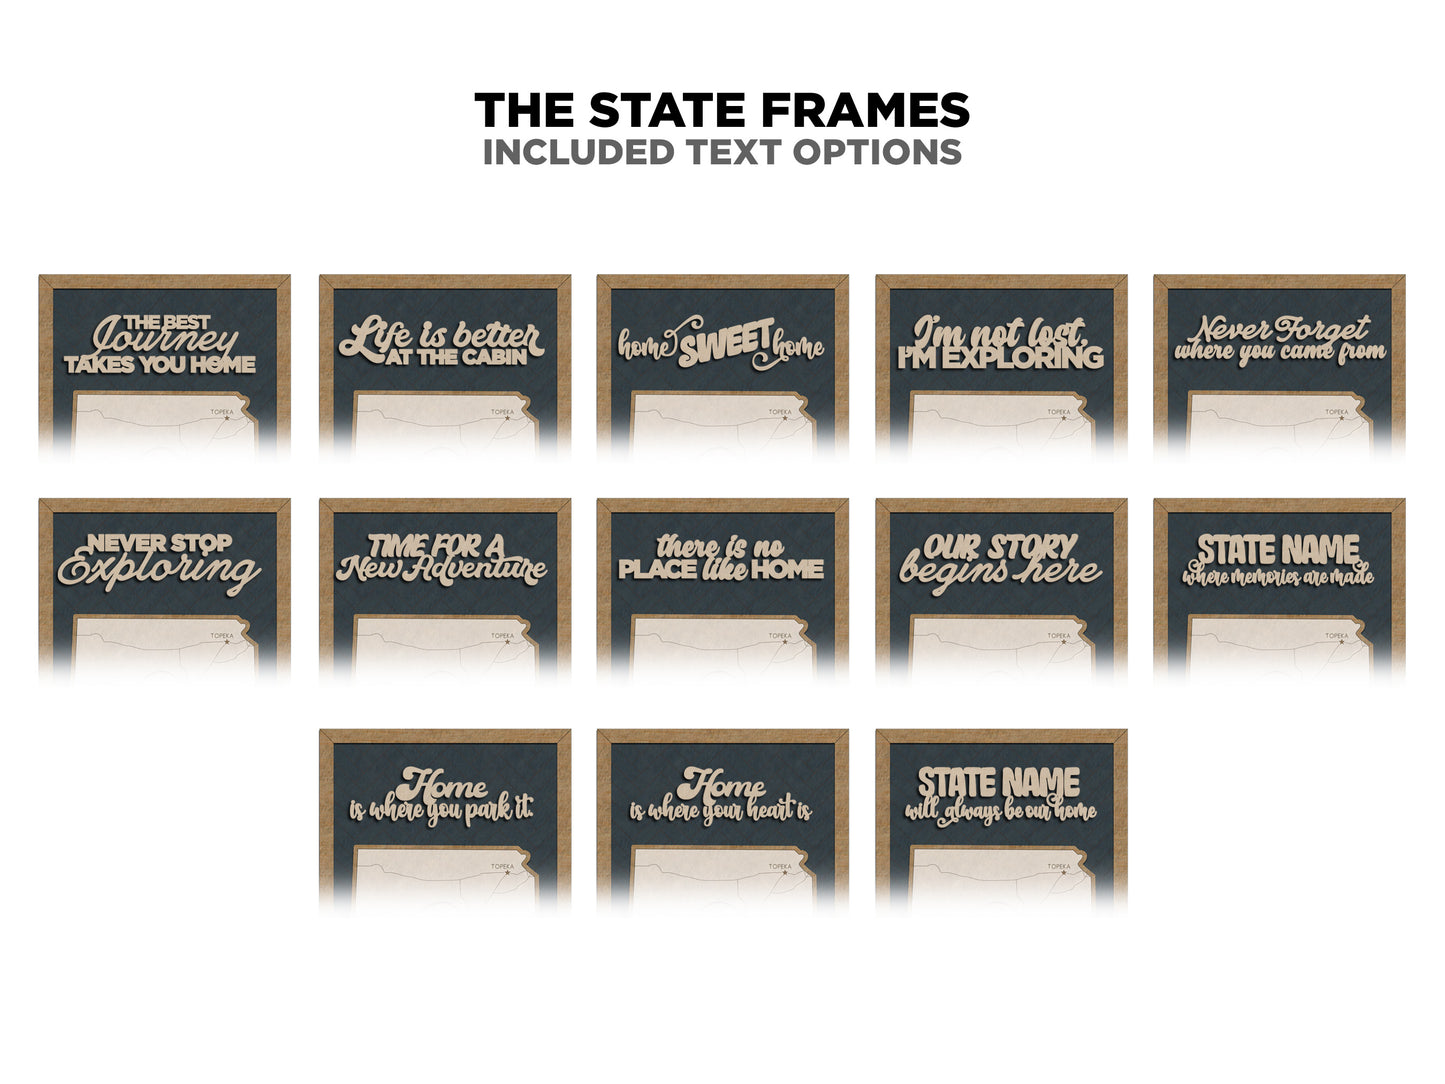 The Oklahoma State Frame - 13 text options, 12 backgrounds, 25 icons Included - Make over 7,500 designs - Glowforge & Lightburn Tested